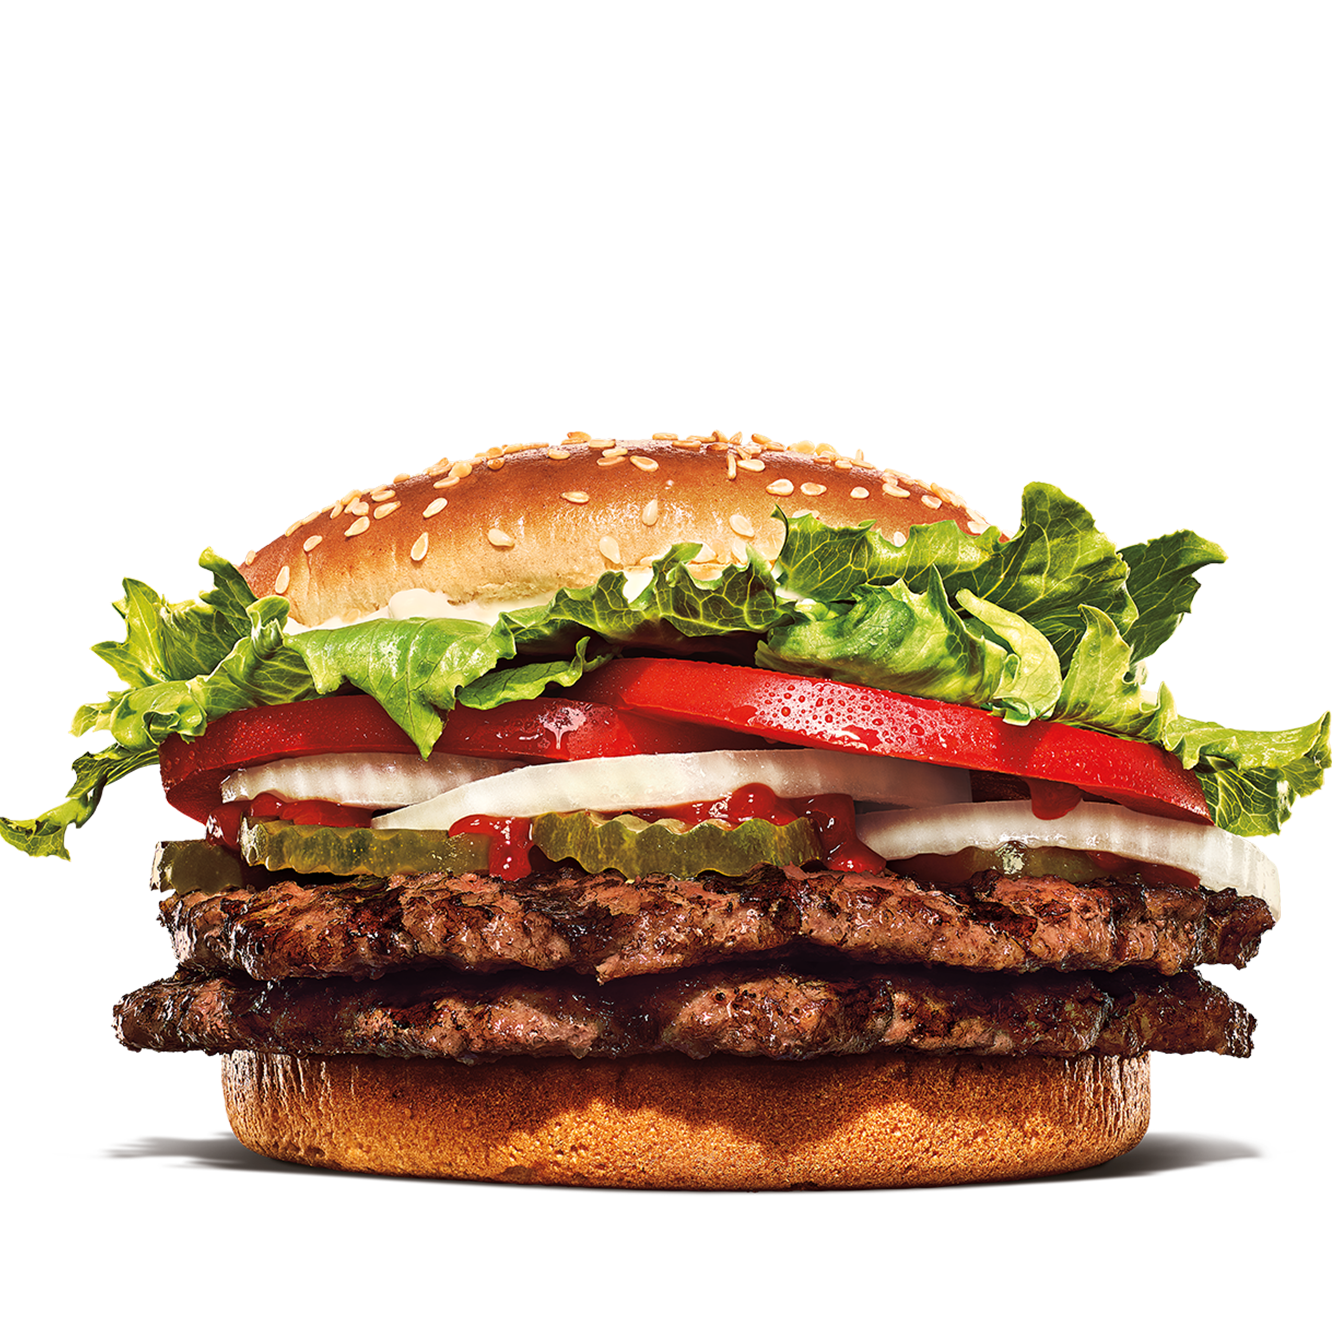 Calories in Burger King Double Whopper